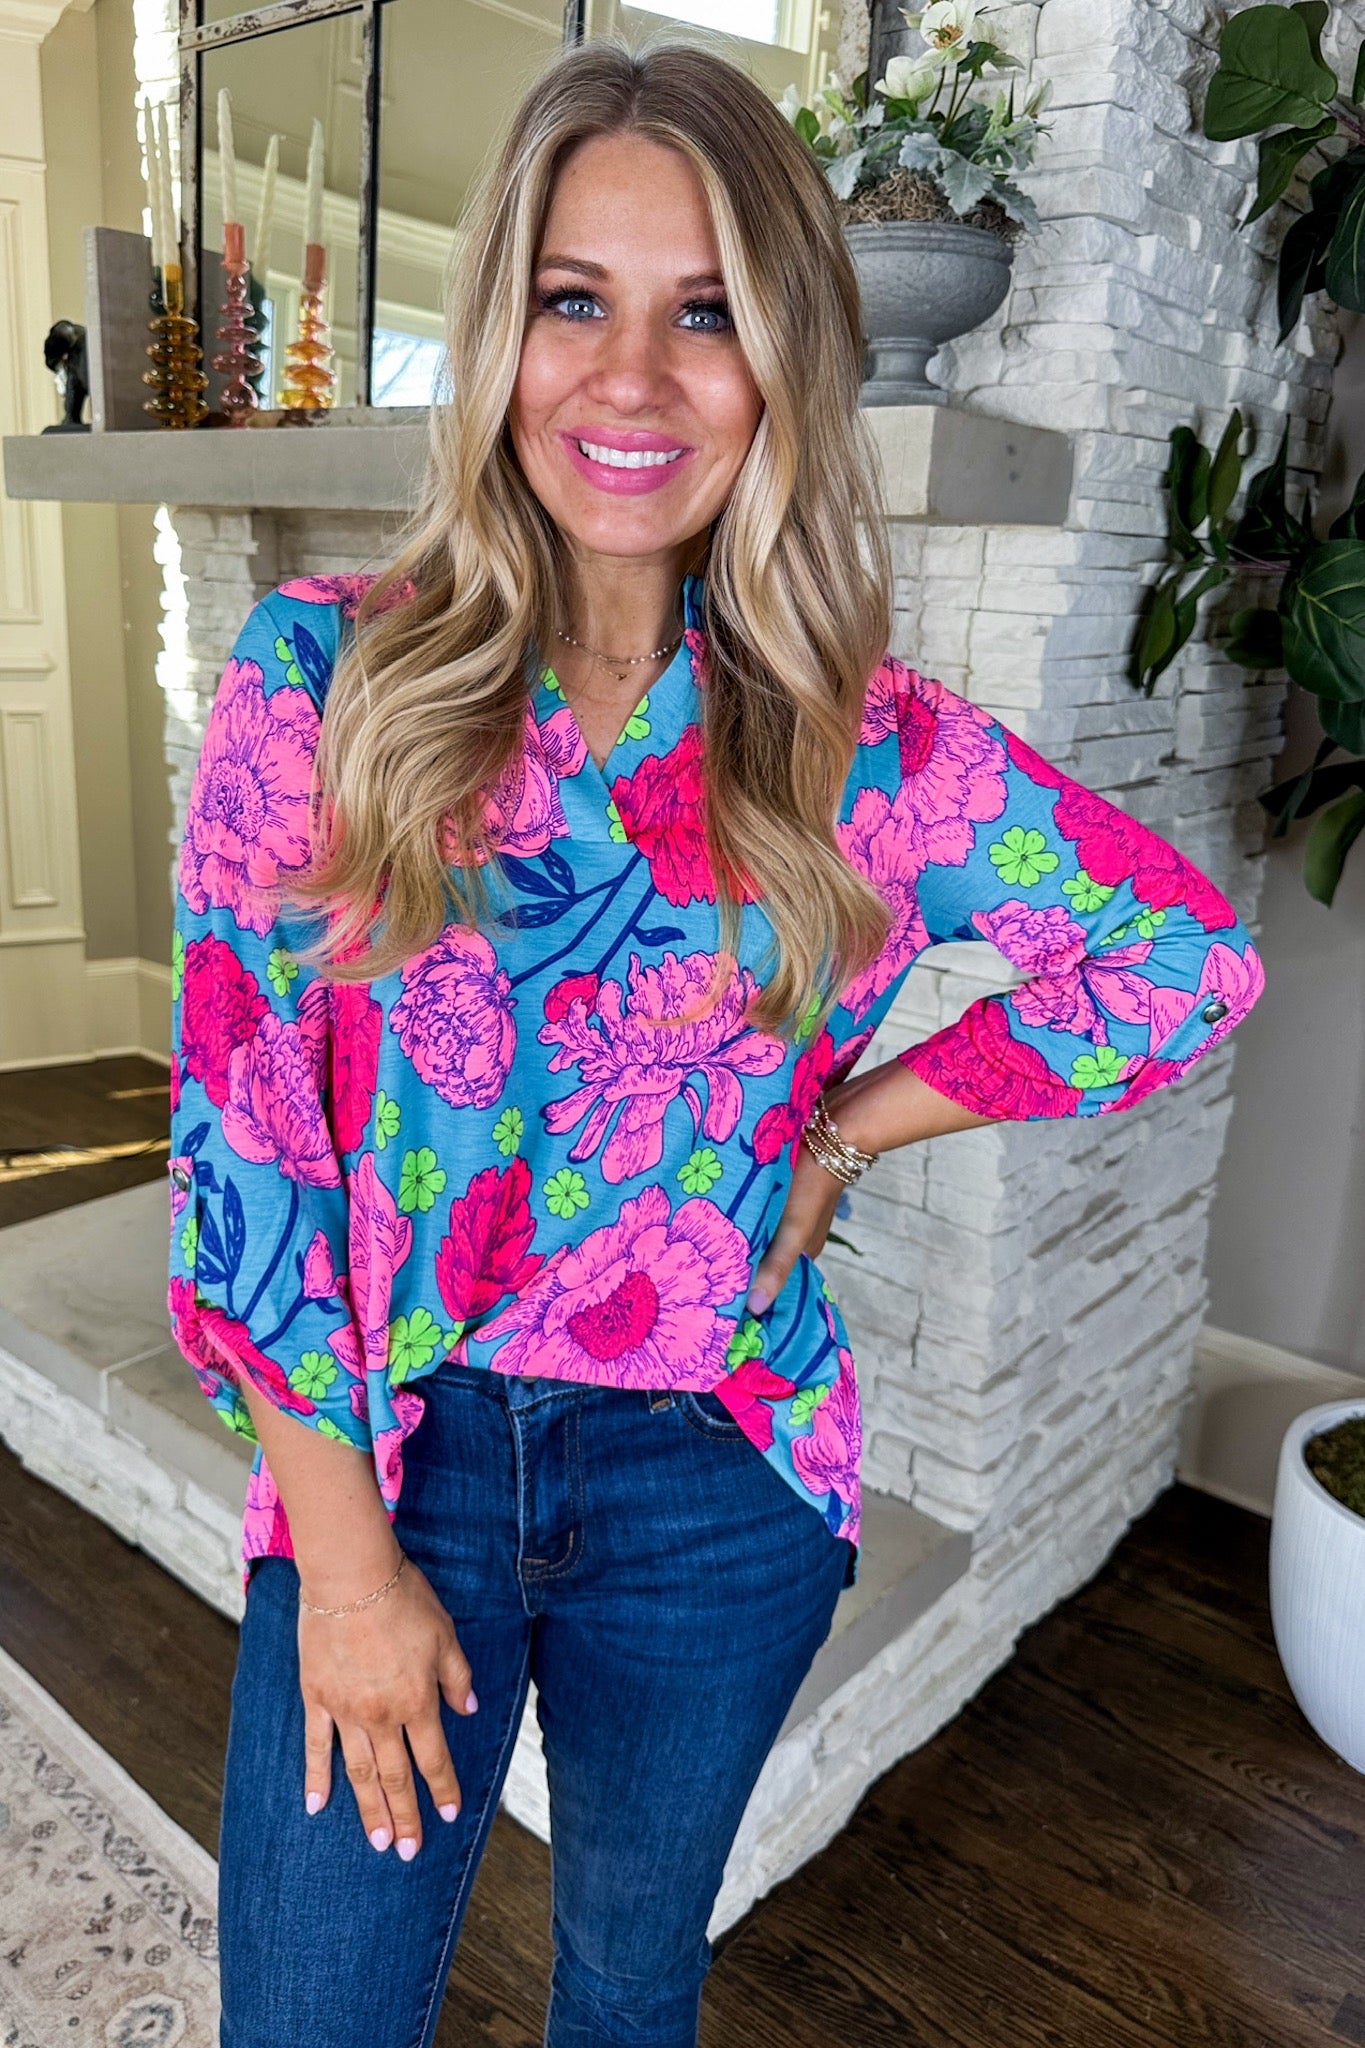 The Lizzy Top in Bright Turquoise Floral